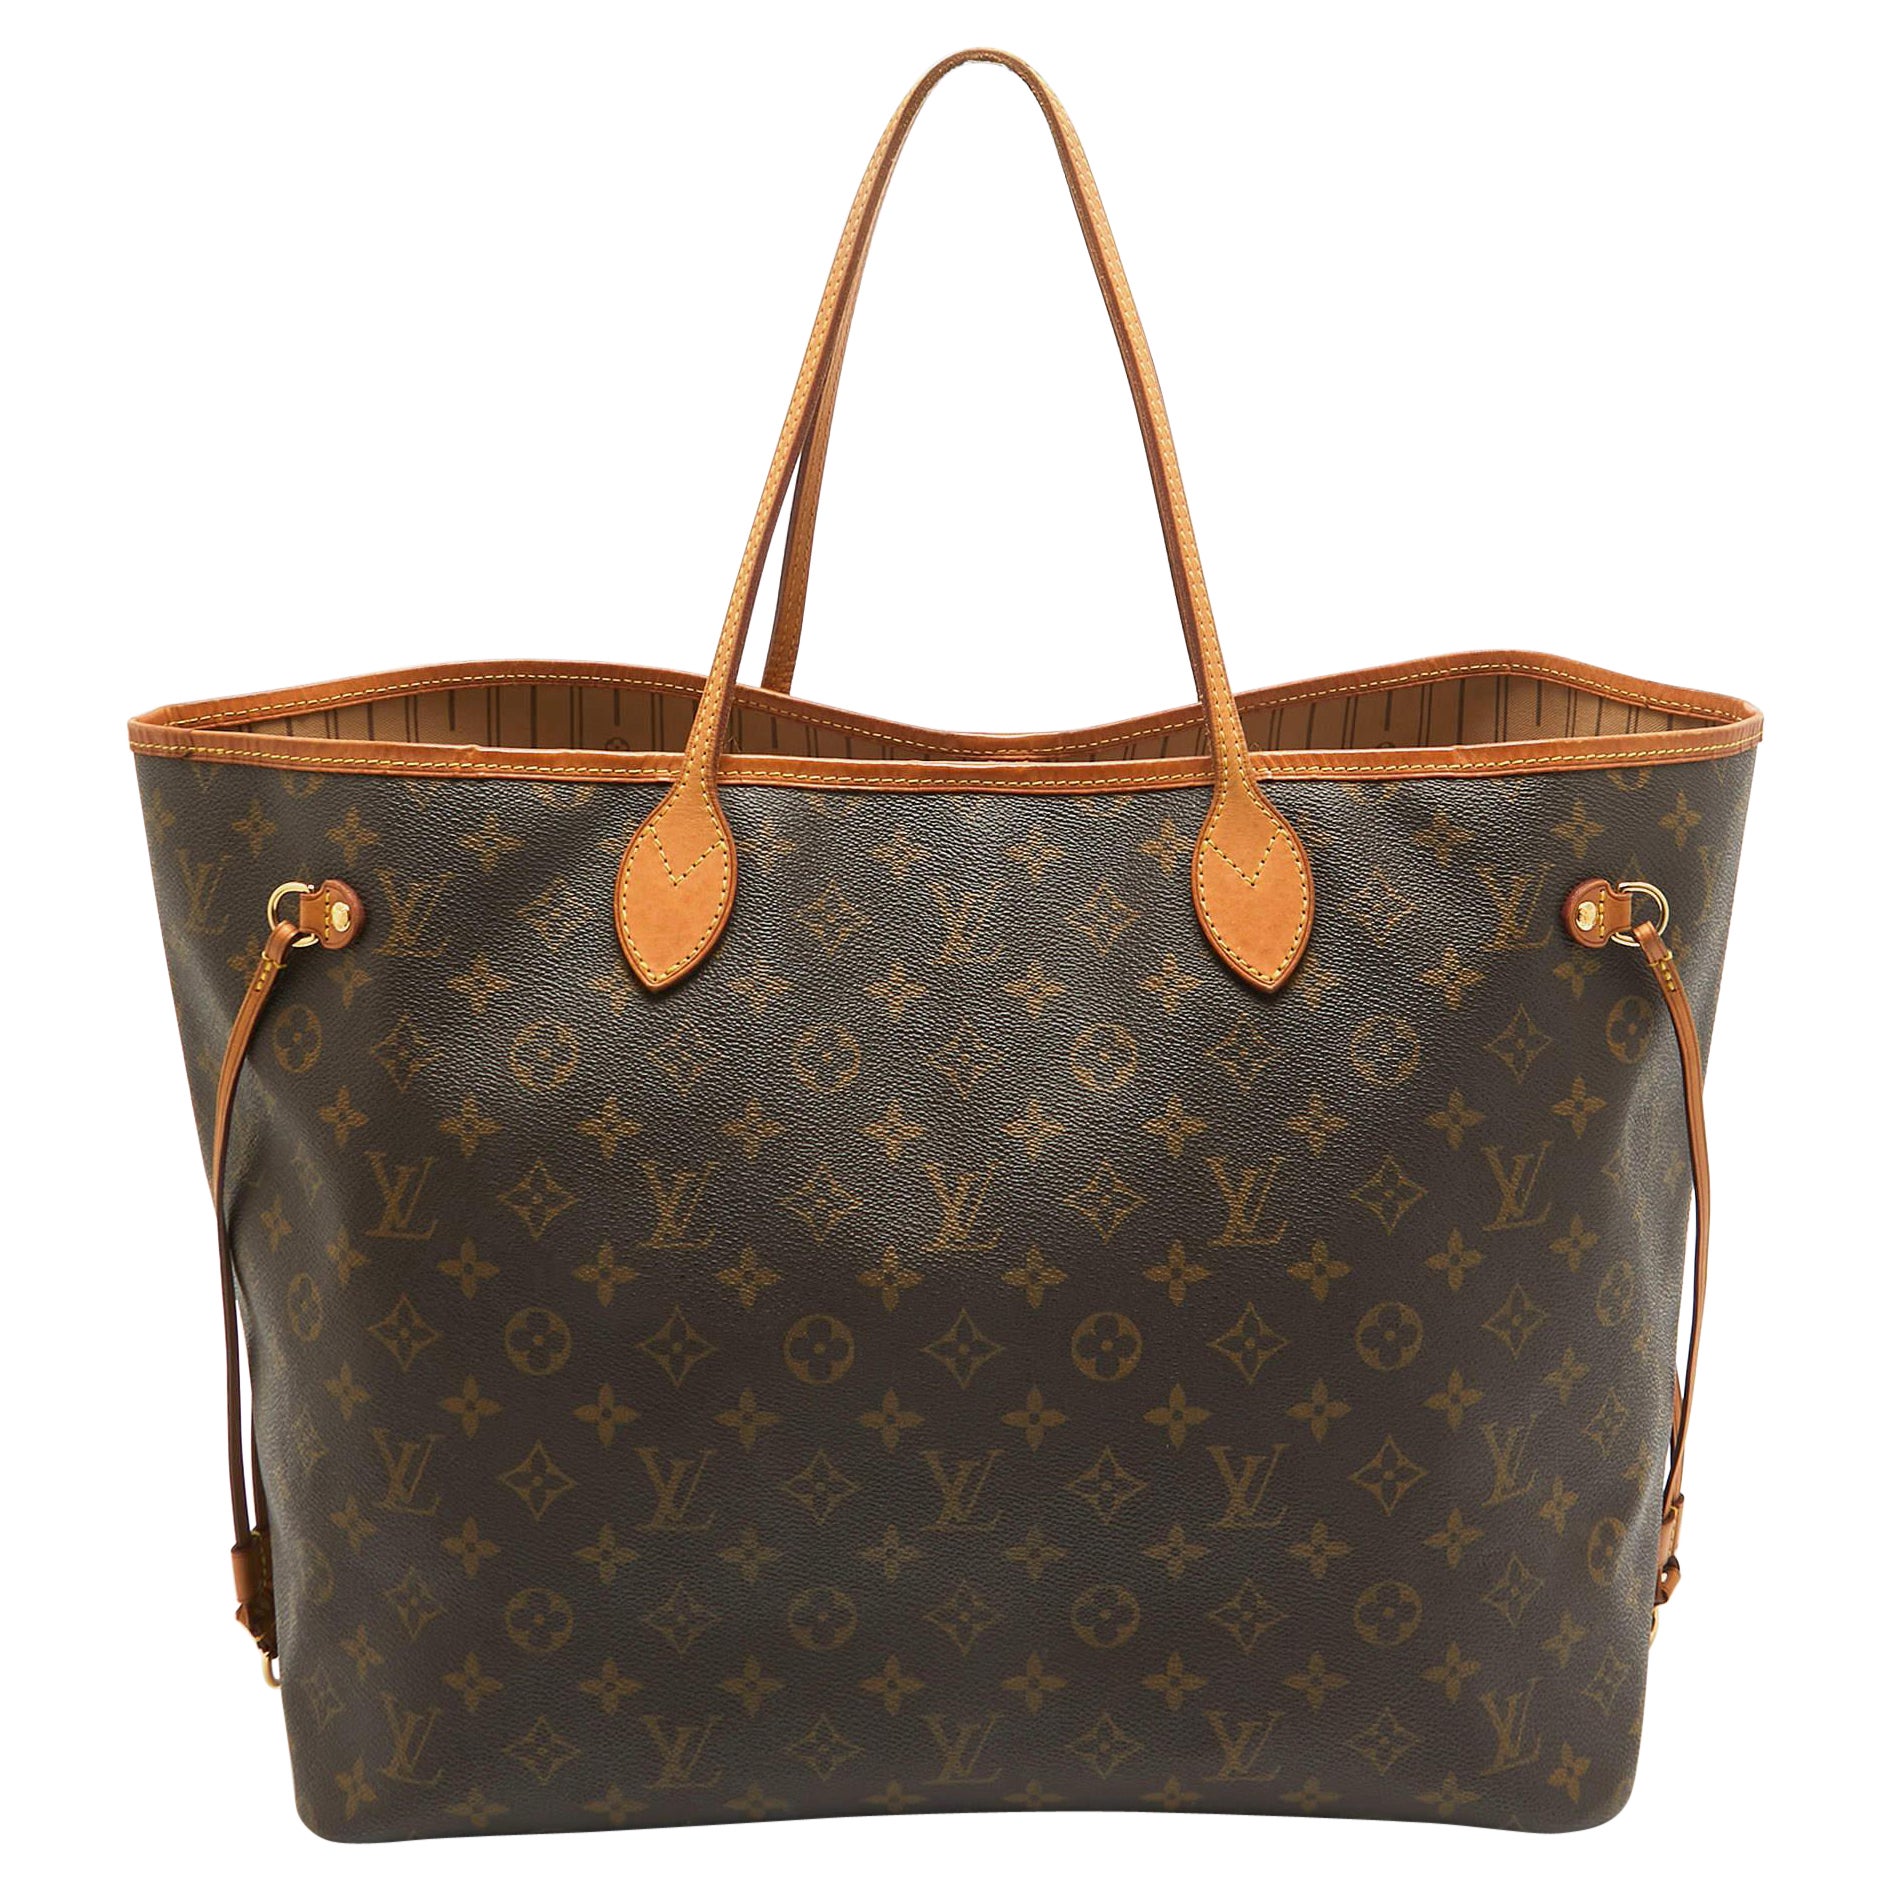 How can I spot a fake Neverfull bag?